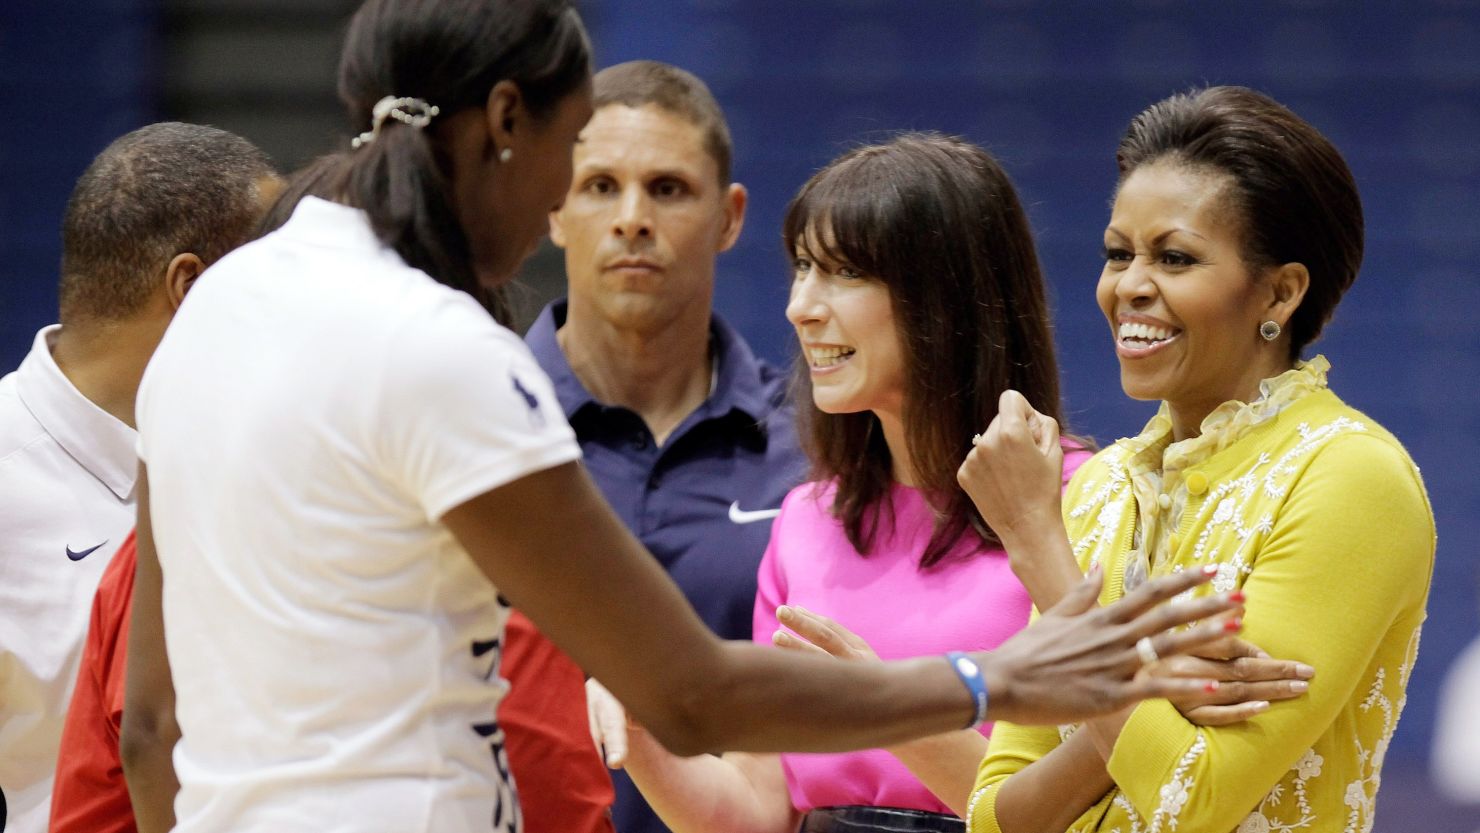 Michelle Obama, far right, and Samantha Cameron meet Olympic champions Dan O'Brien and Lisa Leslie. 